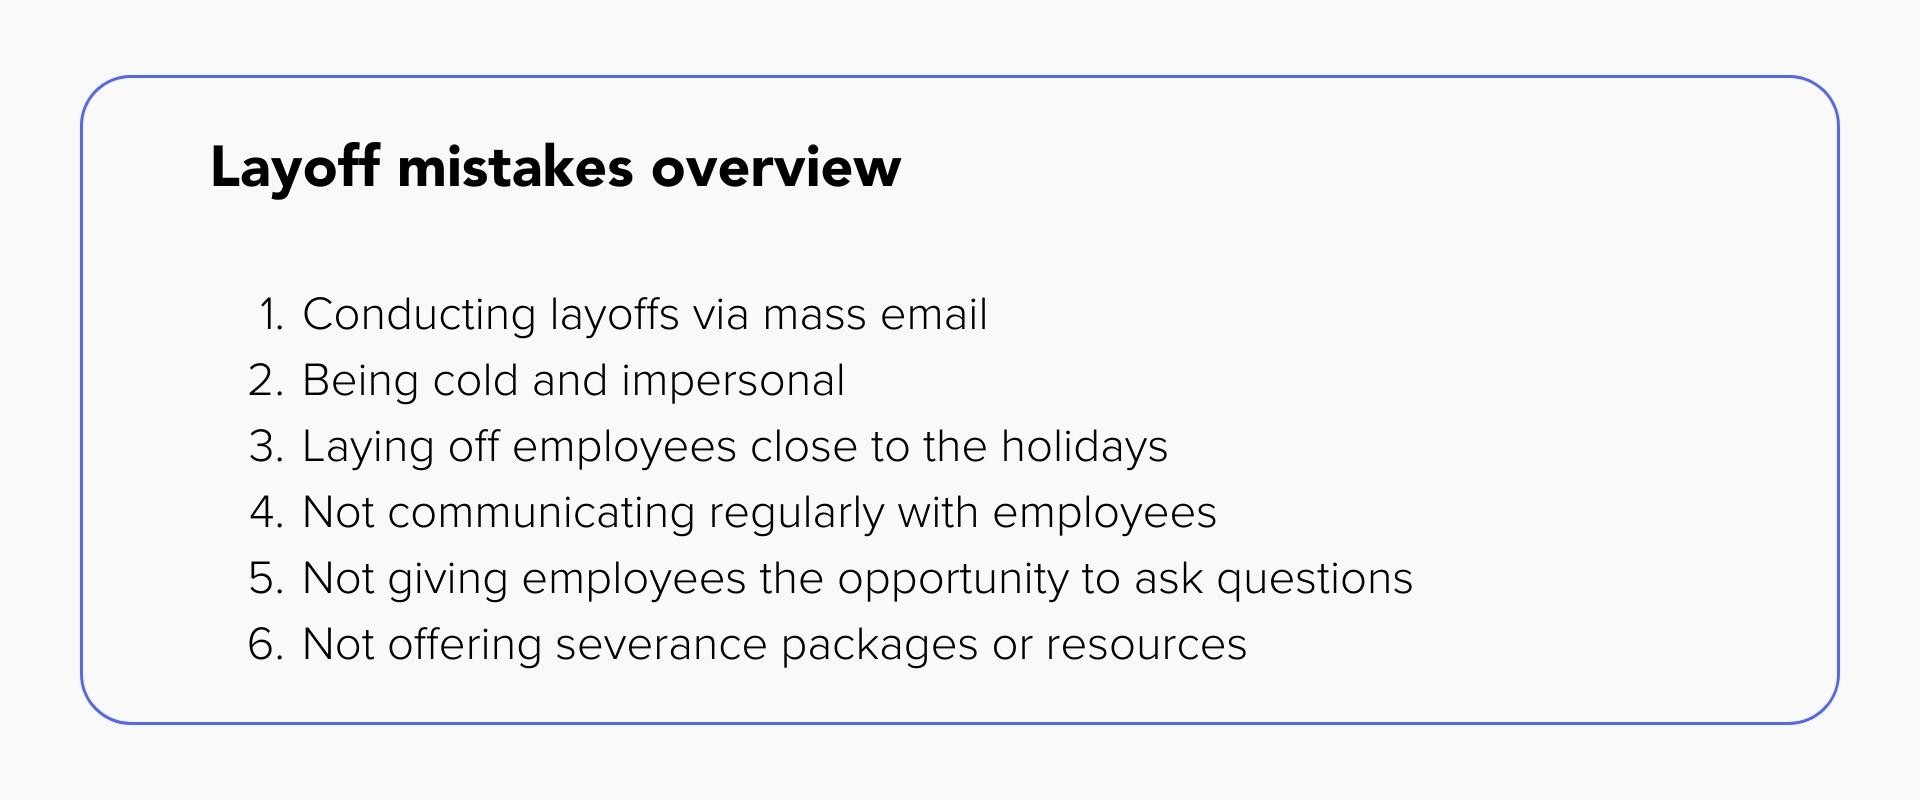 Layoff mistakes overview
1. Conducting layoffs via mass email
2. Being cold and impersonal
3. Laying off employees close to the holidays
4. Not communicating regularly with employees
5. Not giving employees the opportunity to ask questions
6. Not offering severance packages or resources